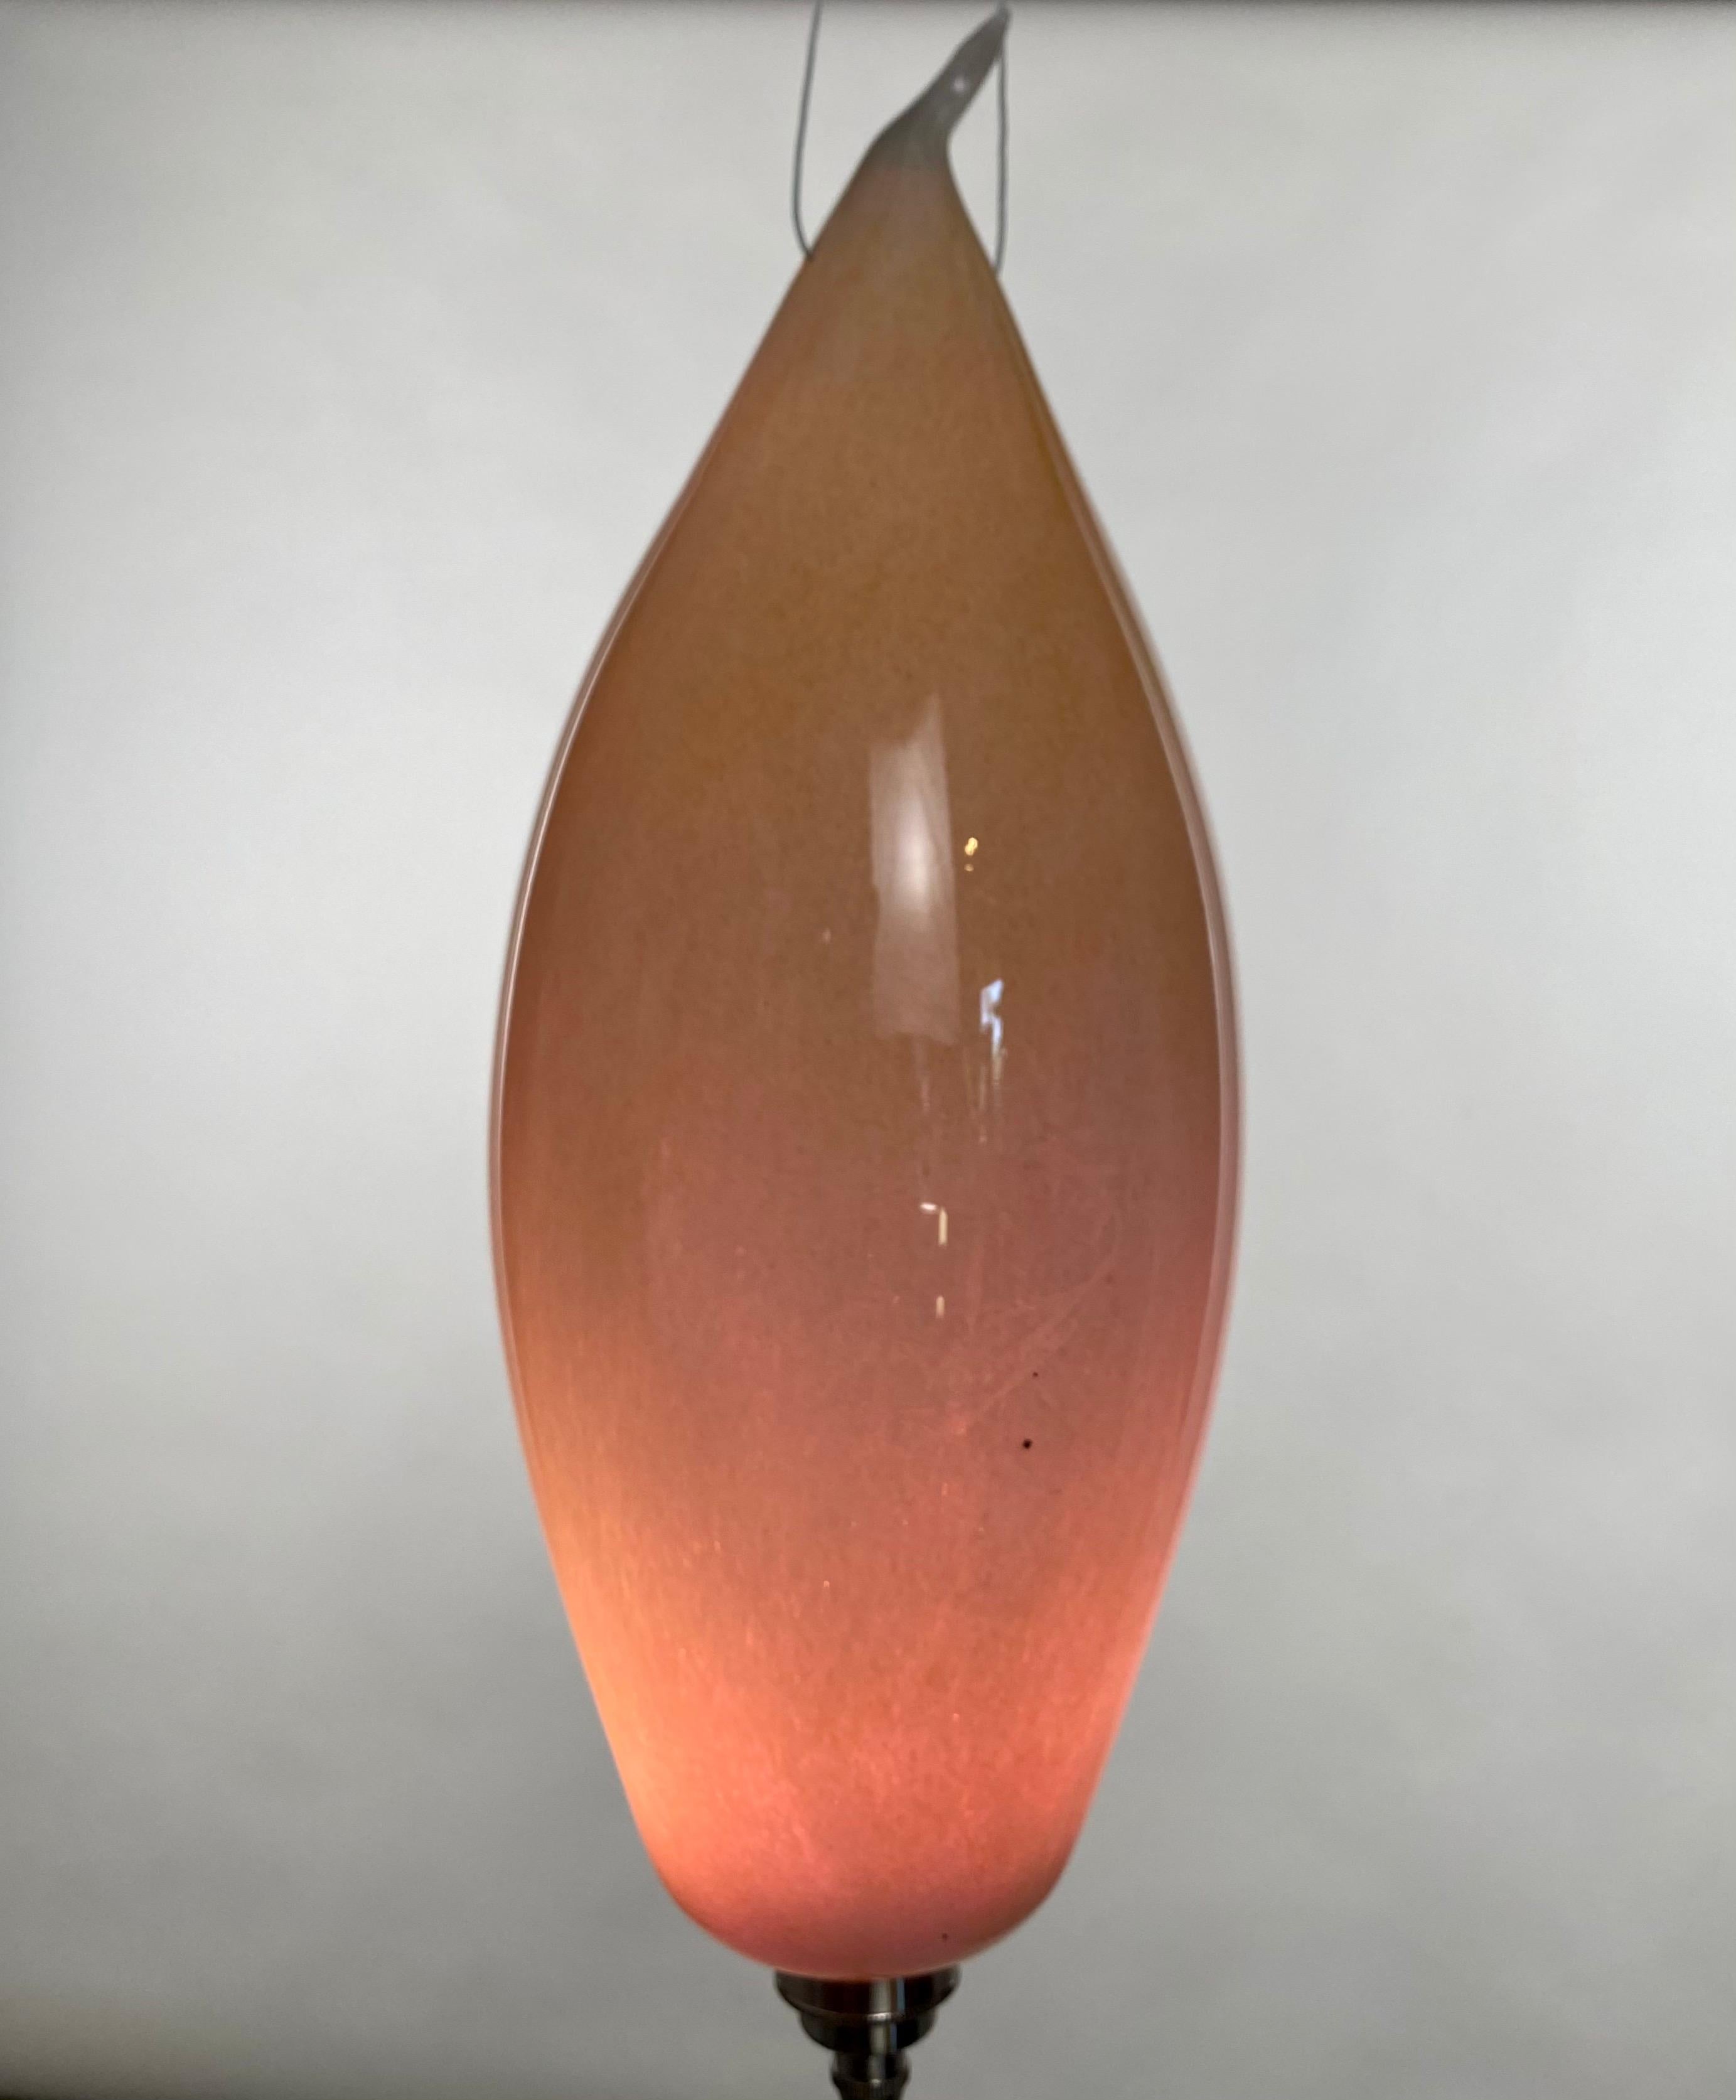 Contemporary Blown Glass Pink and Orange Lamp Pendent Light, 21st Century by Mattia Biagi For Sale